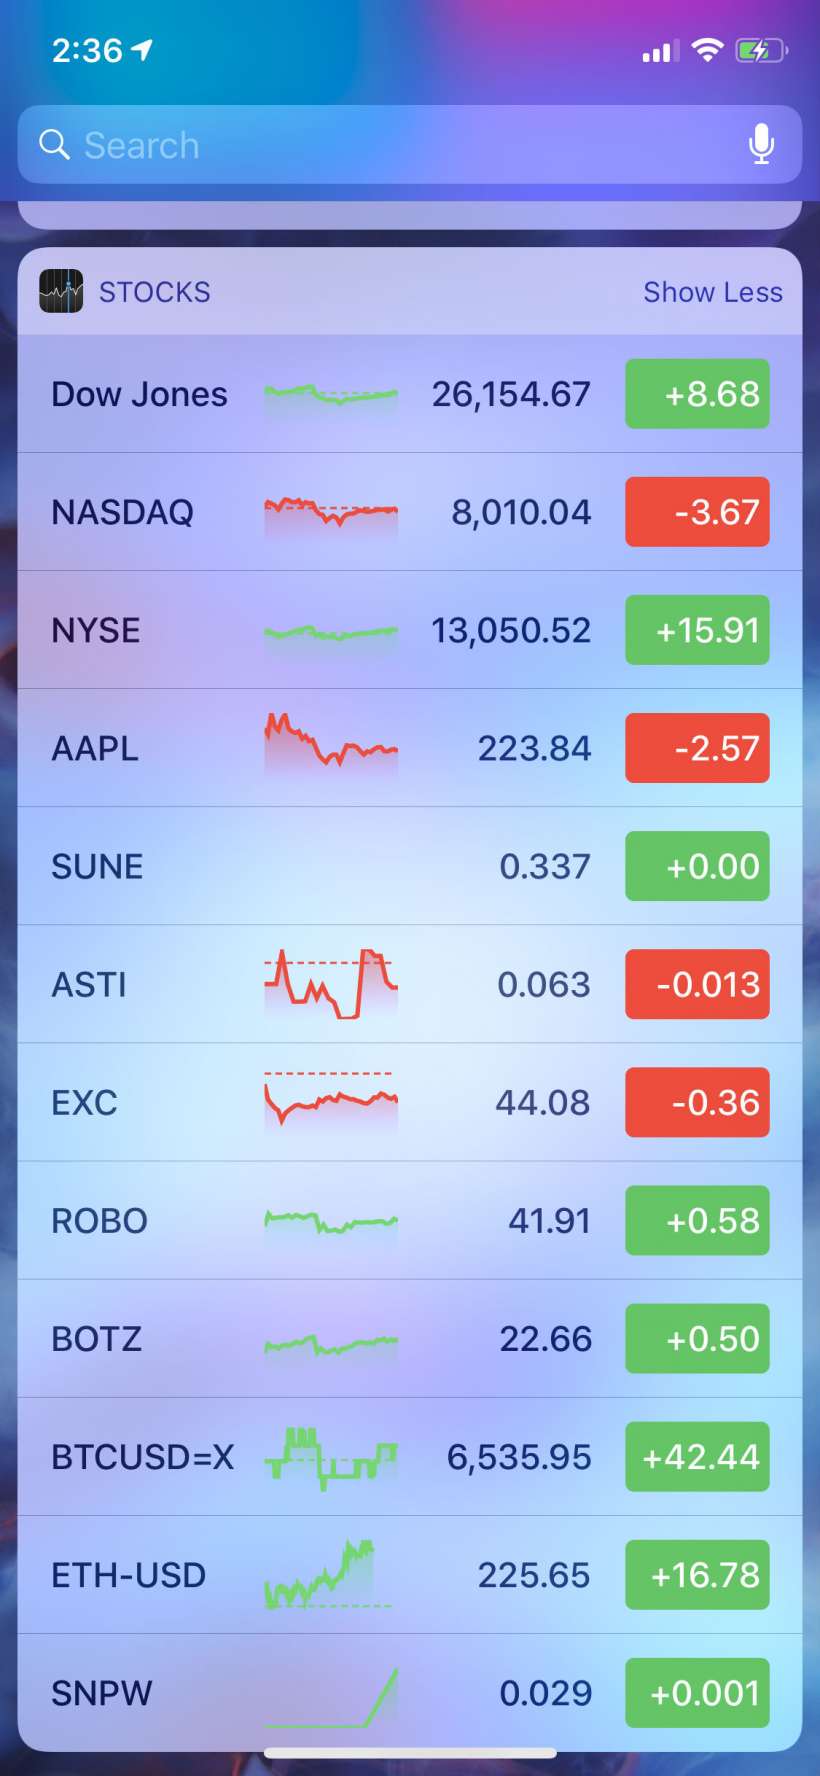 How to track Bitcoin (BTC), Ethereum (ETH), Ripple (XRP) and other cryptocurrency prices on your Stocks app and Notification Center on iPhone and iPad.